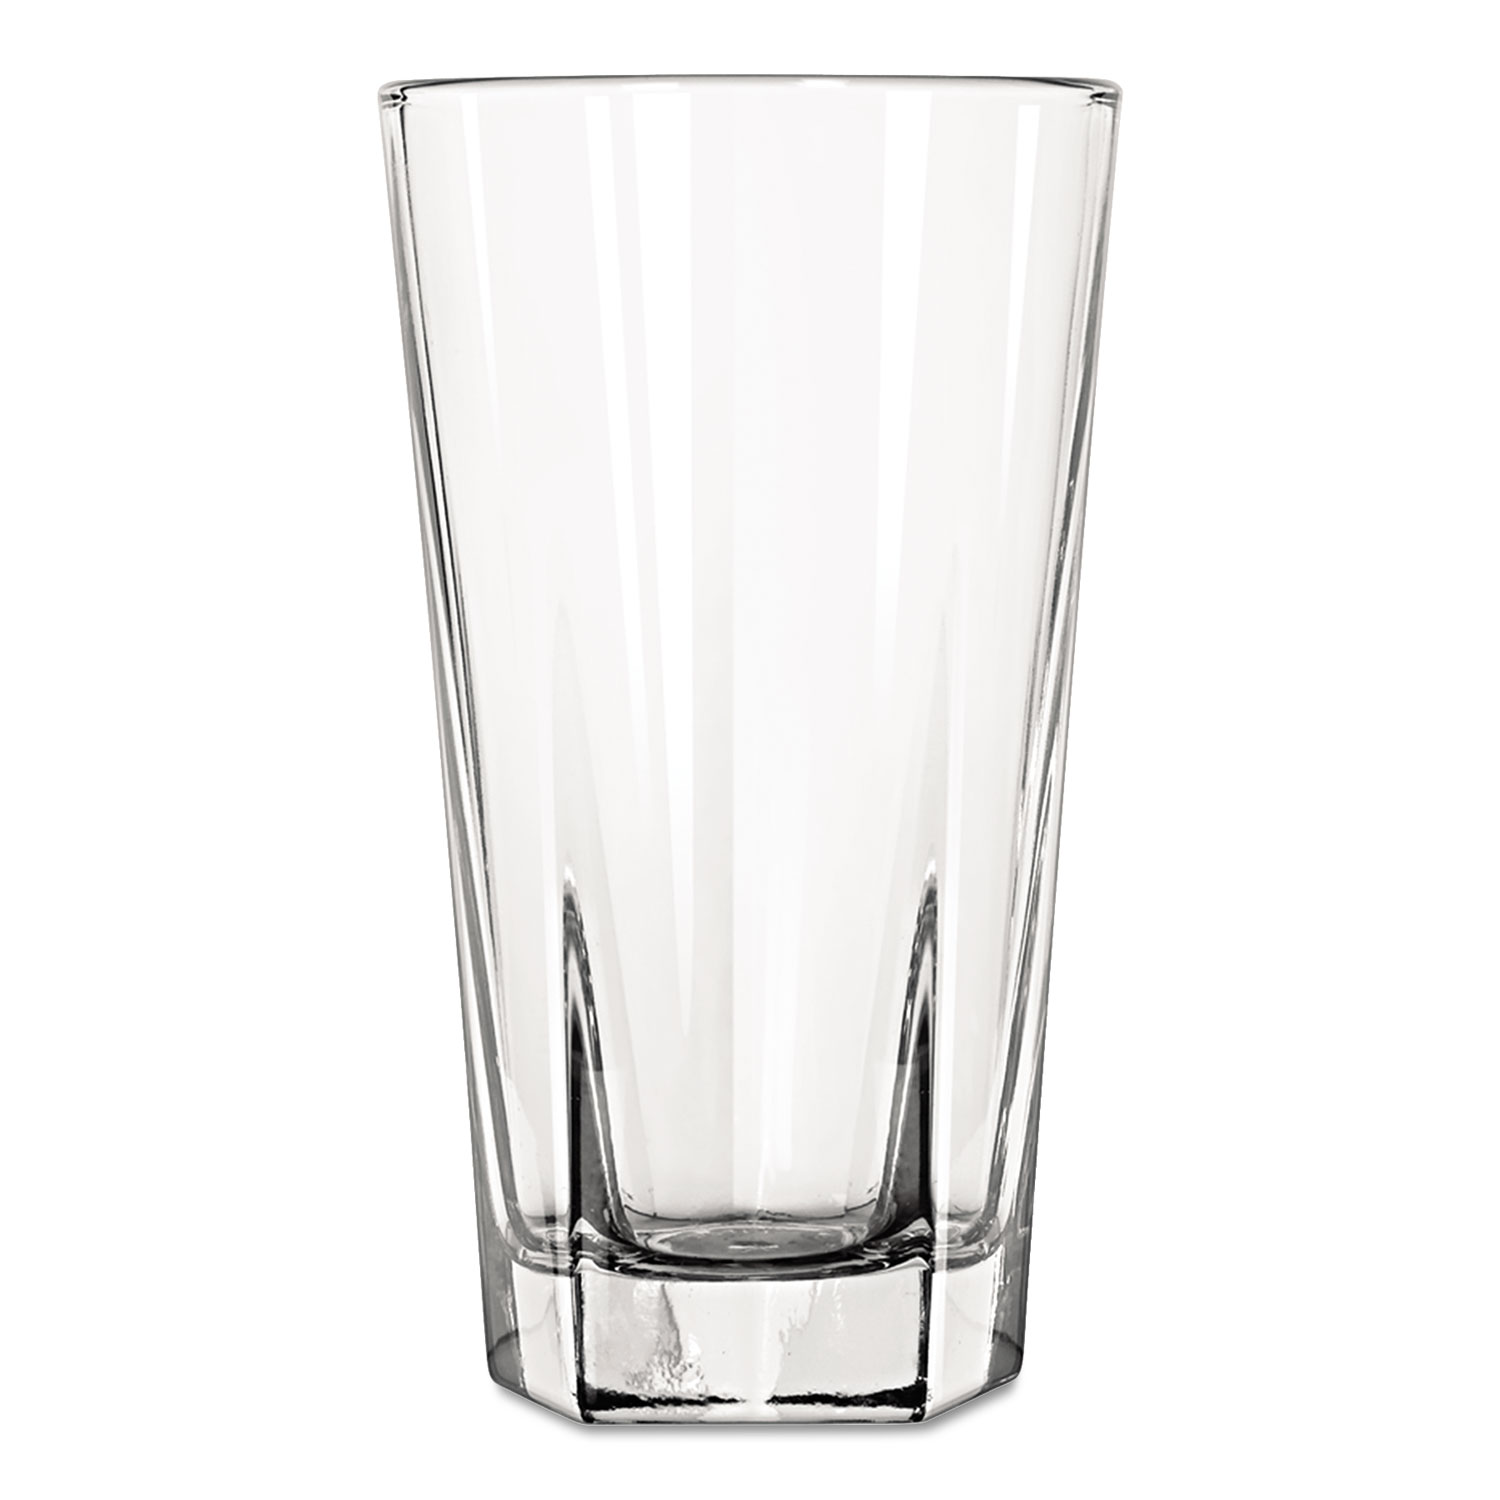 Inverness Glass Tumblers, Beverage, 12 oz, Clear, 36/Carton